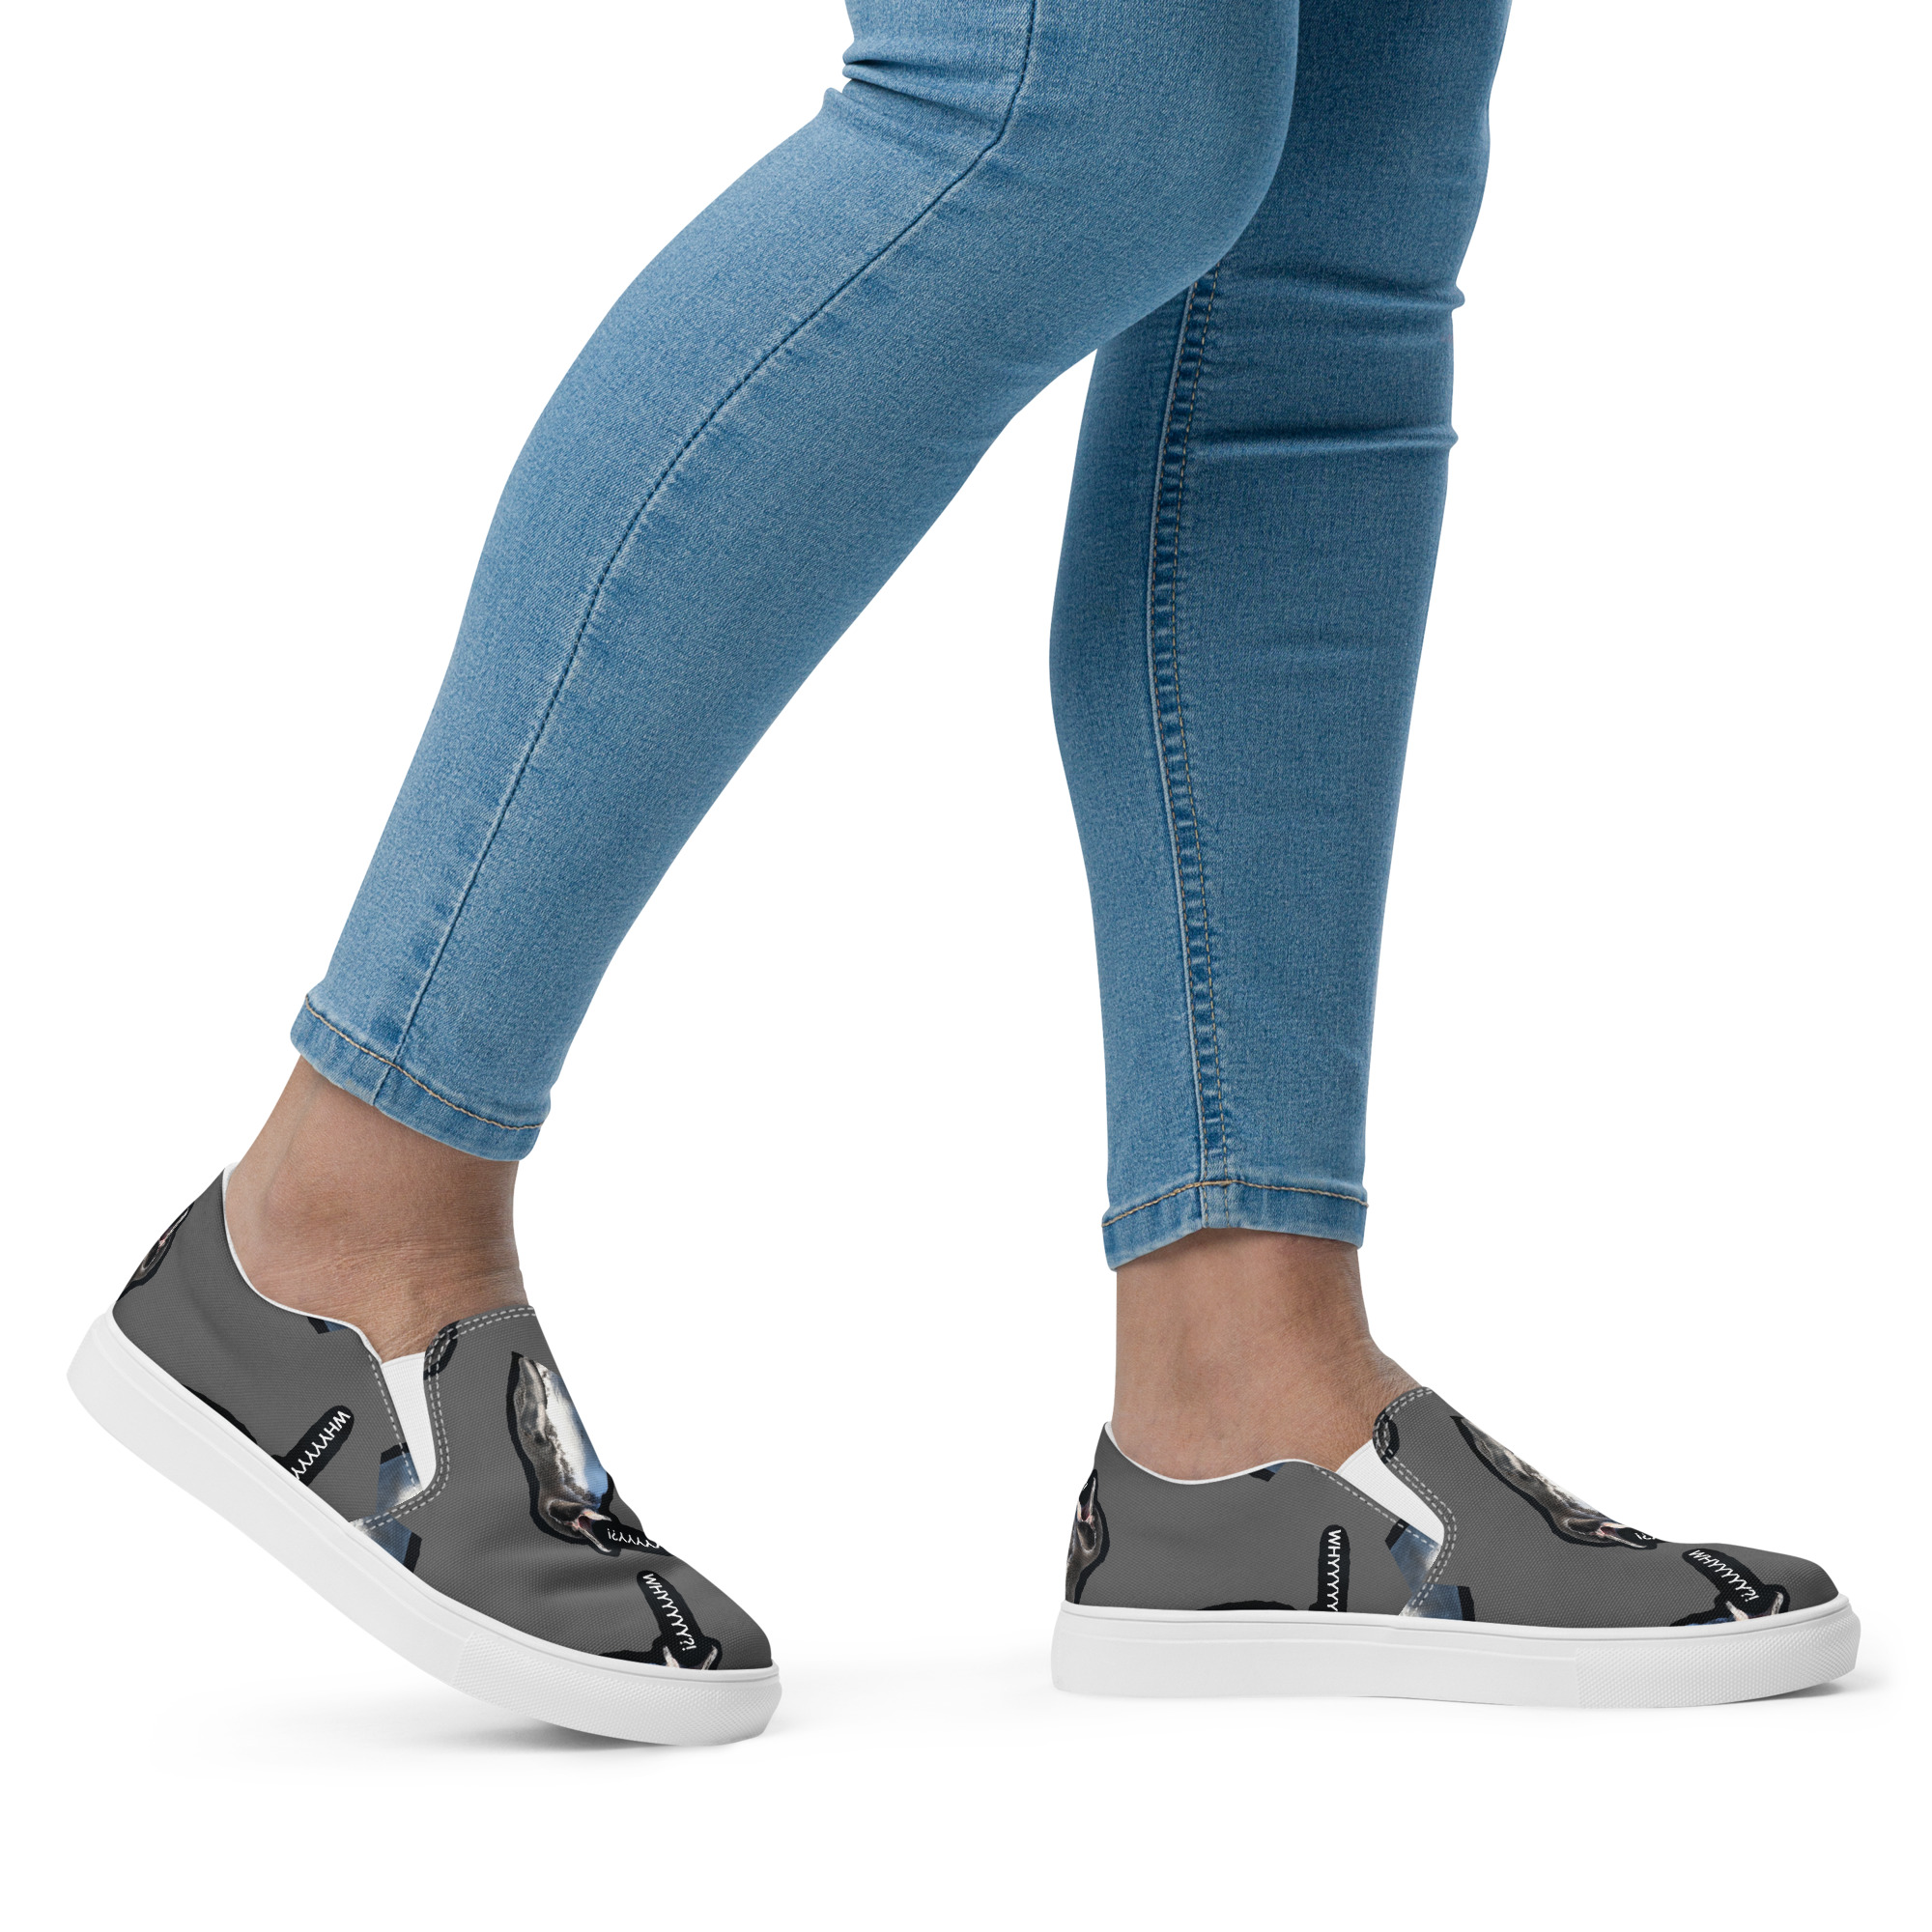 GP questions life grey Women’s sized slip-on canvas shoes